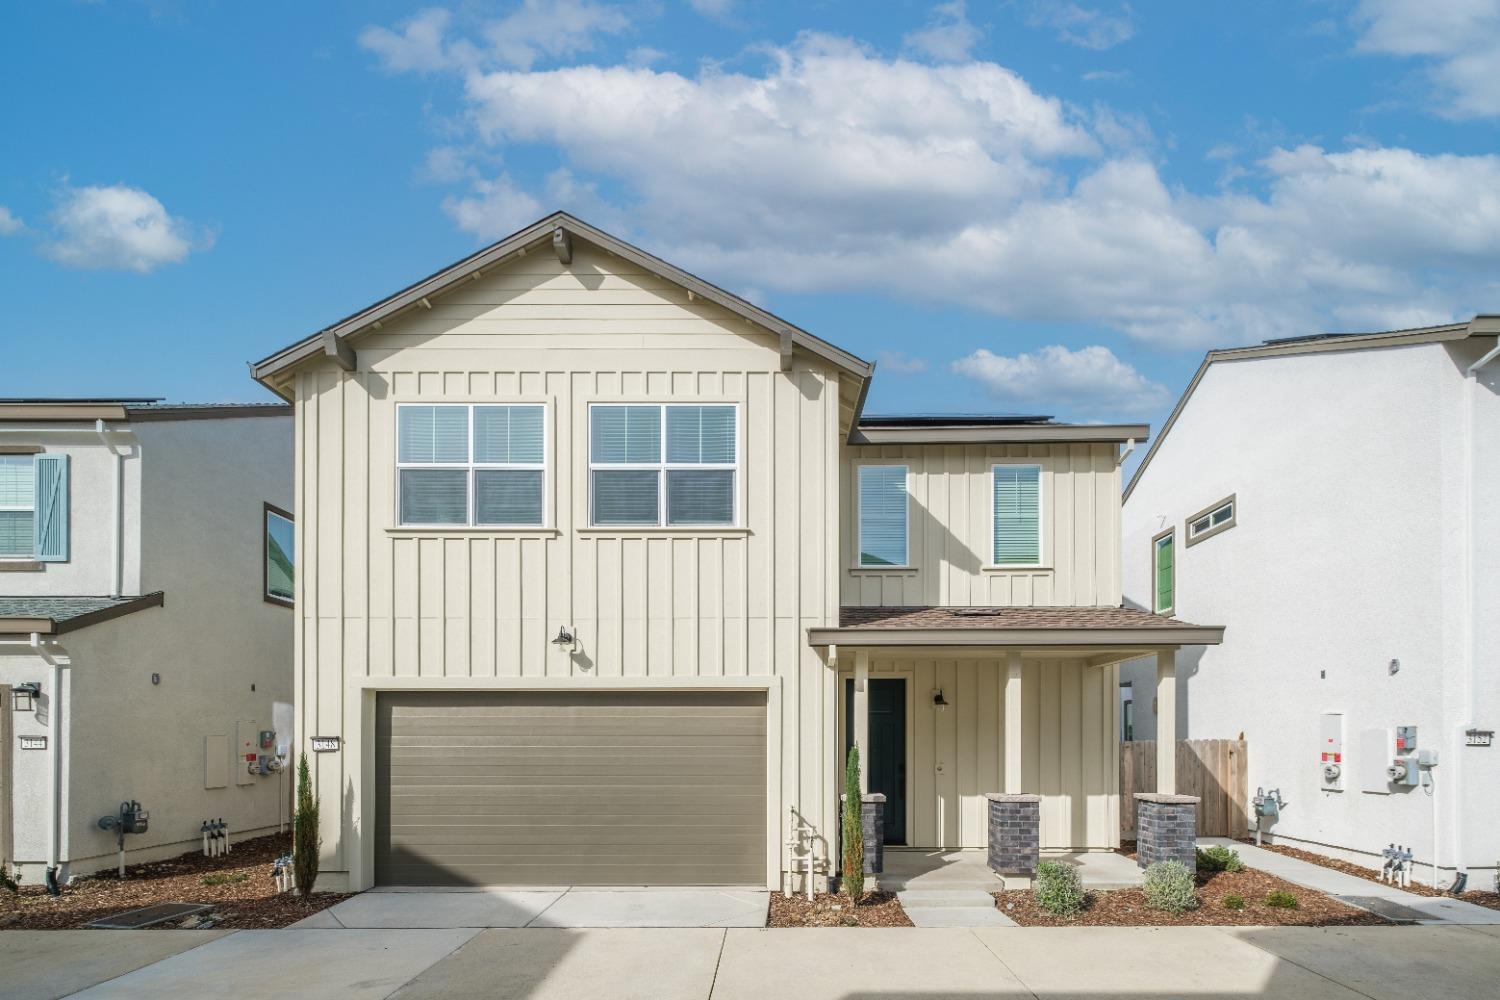 Welcome to your dream home in Folsom's prestigious Russell Ranch community. This stunning two-story 